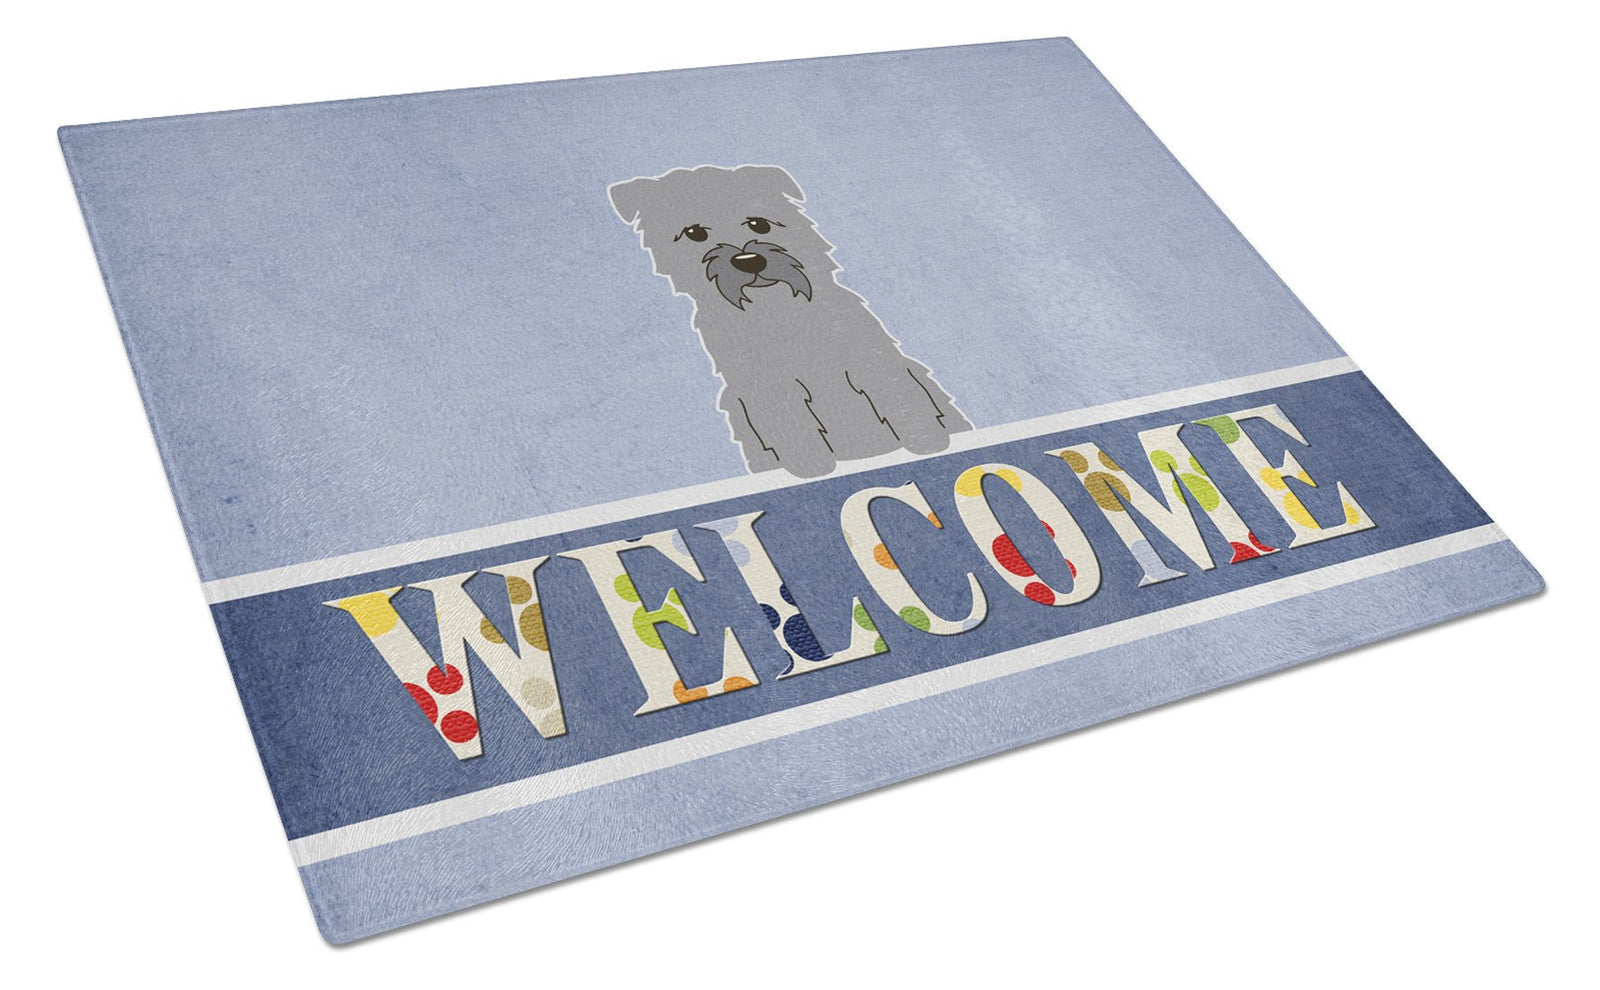 Glen of Imal Grey Welcome Glass Cutting Board Large BB5640LCB by Caroline's Treasures